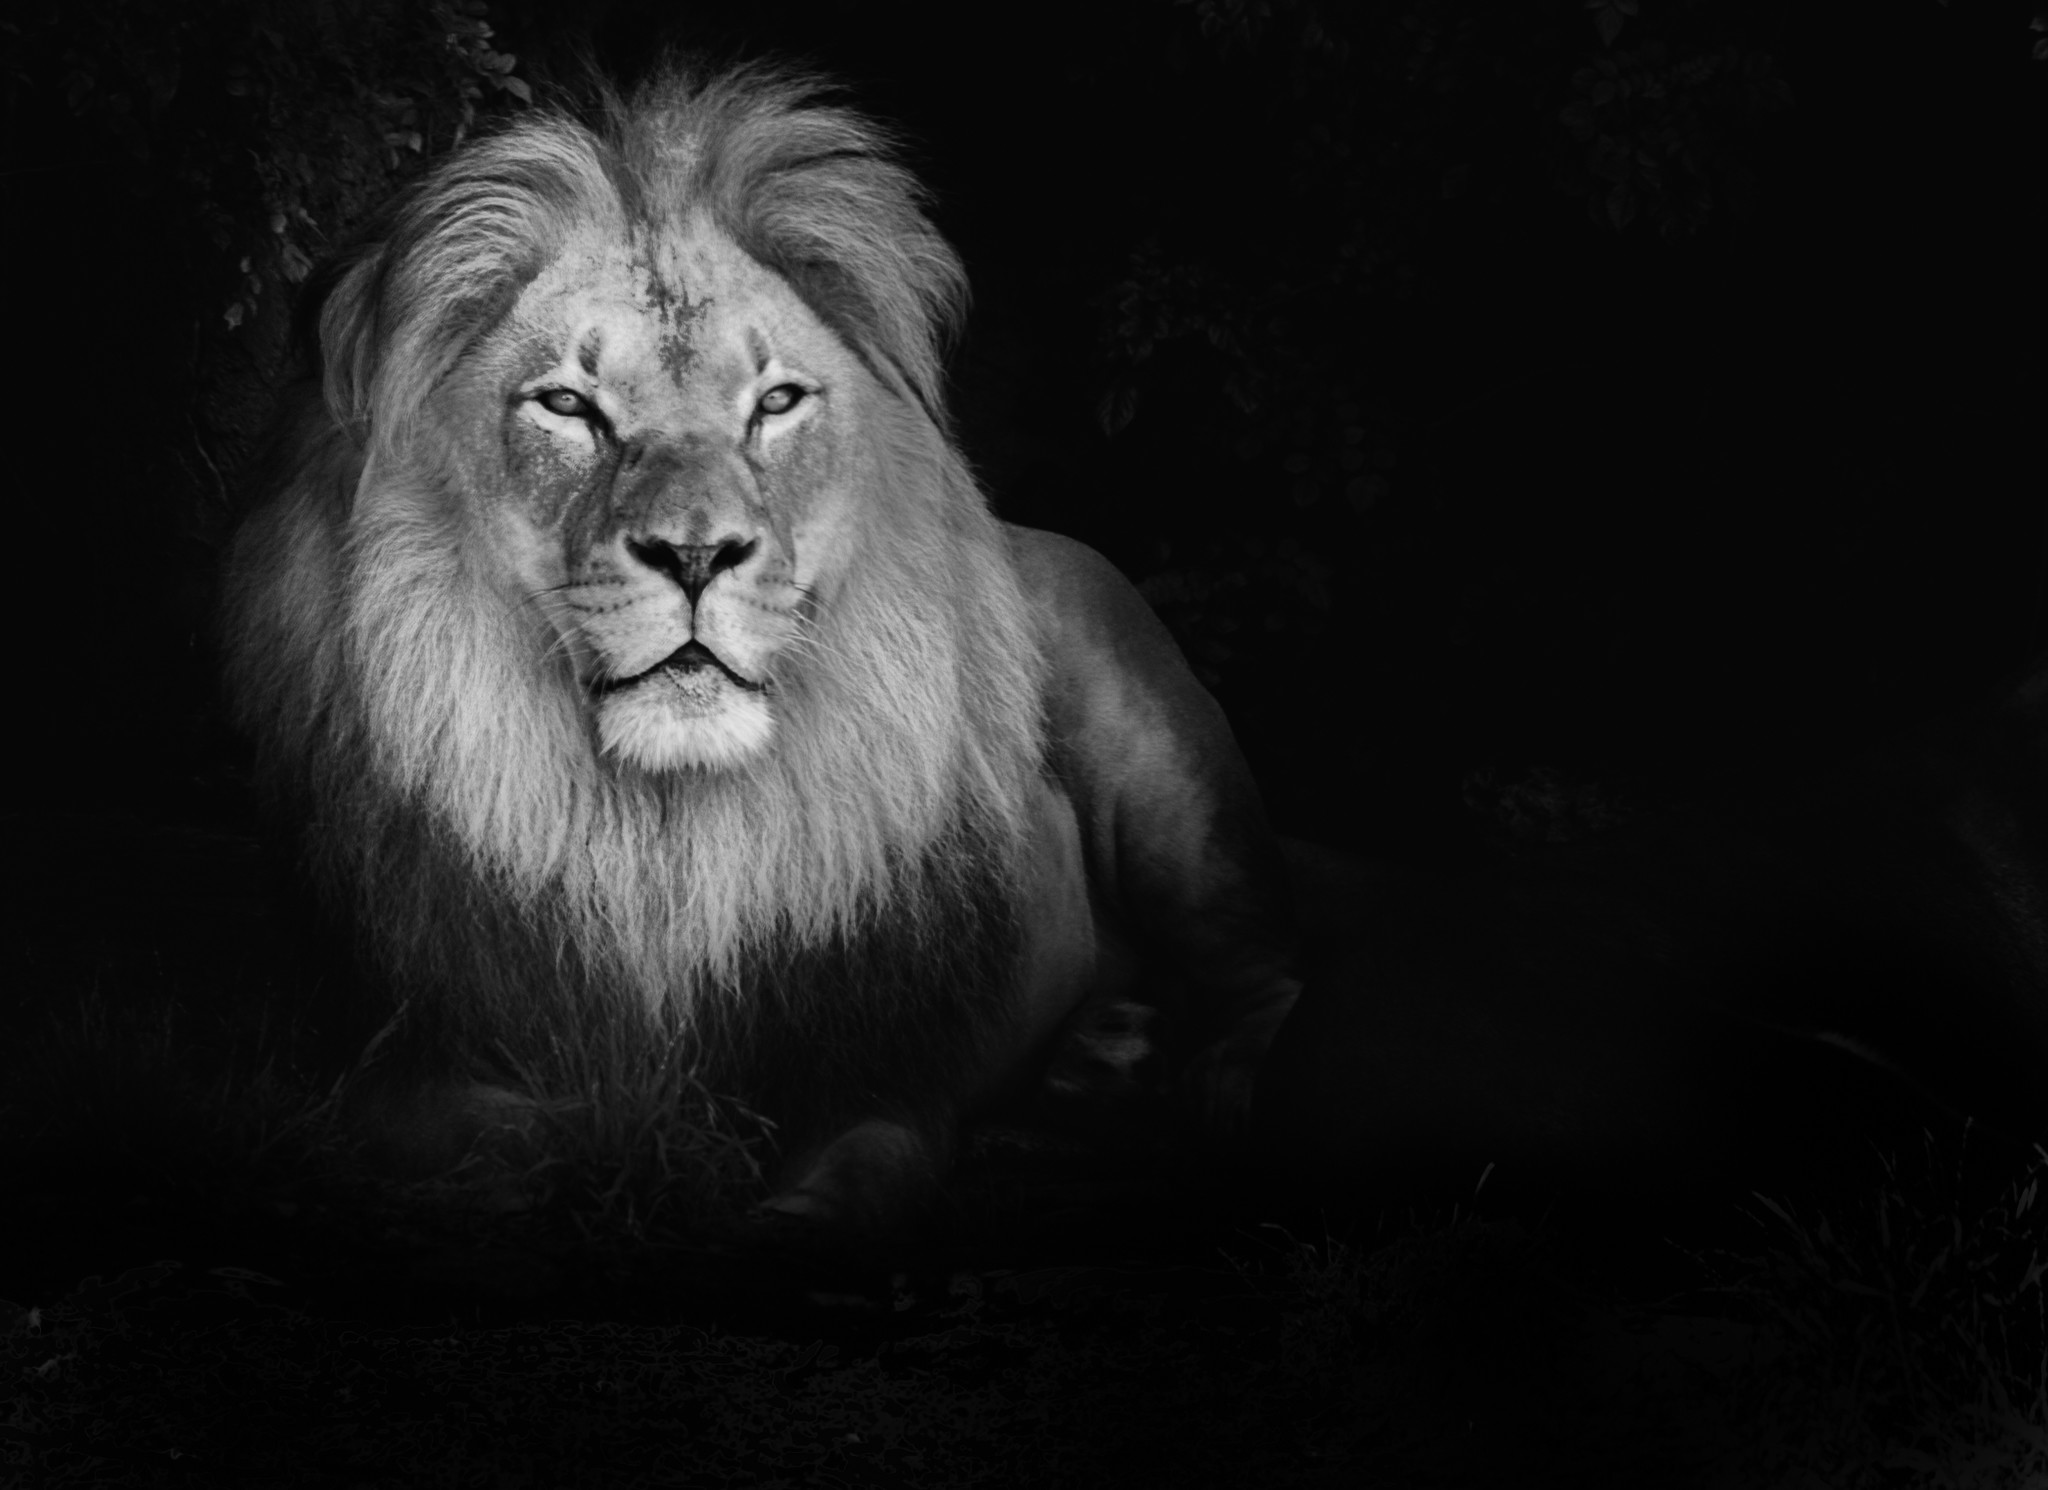 2048x1490 Lion Black and White High Quality Wallpapers 6483 - Amazing Wallpaperz